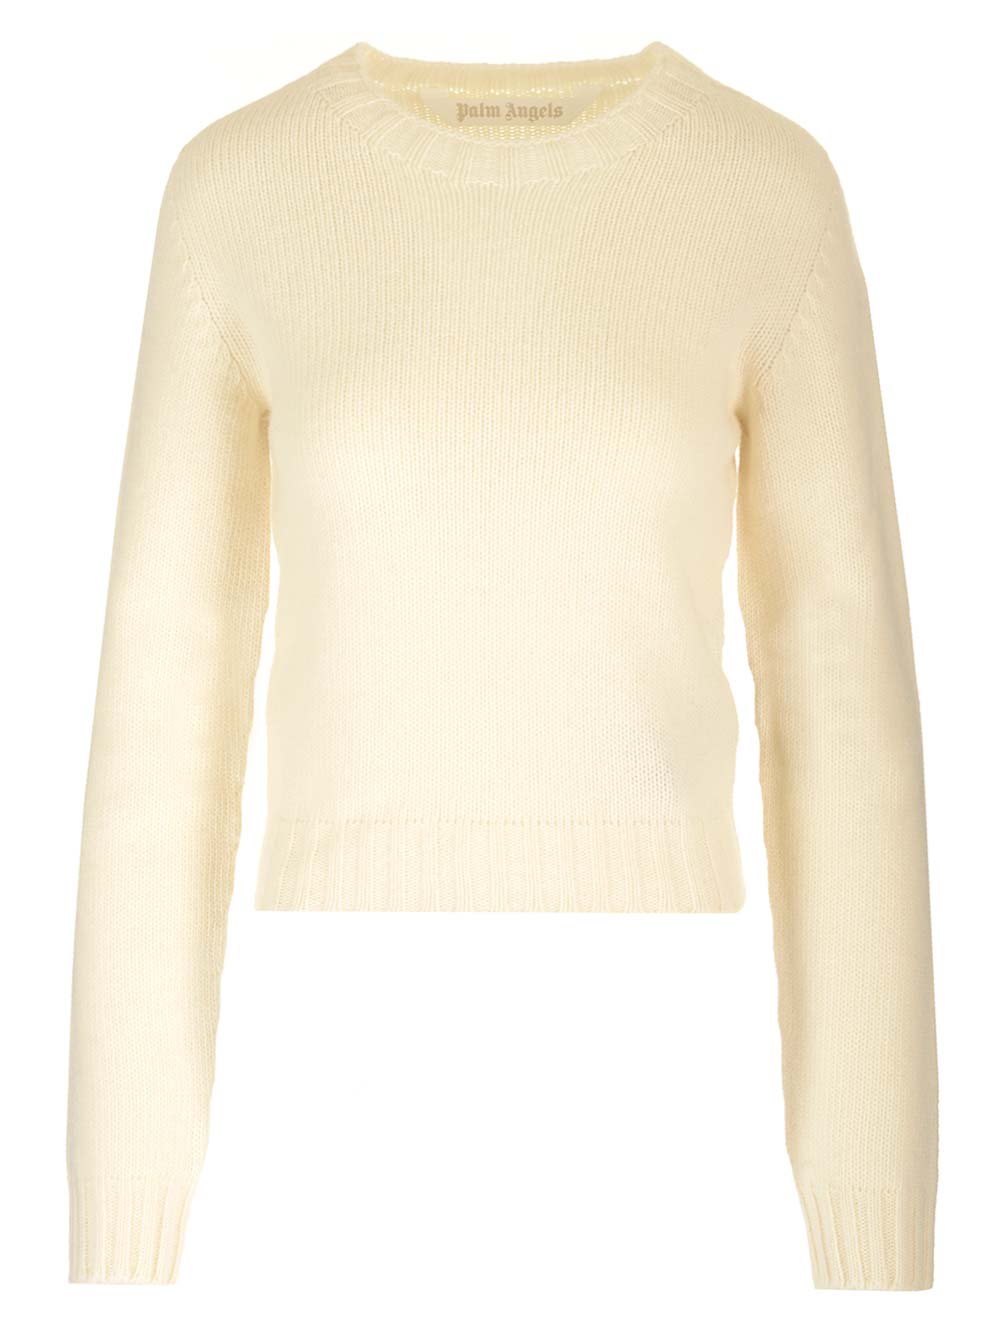 PALM ANGELS IVORY SWEATER WITH BACK LOGO